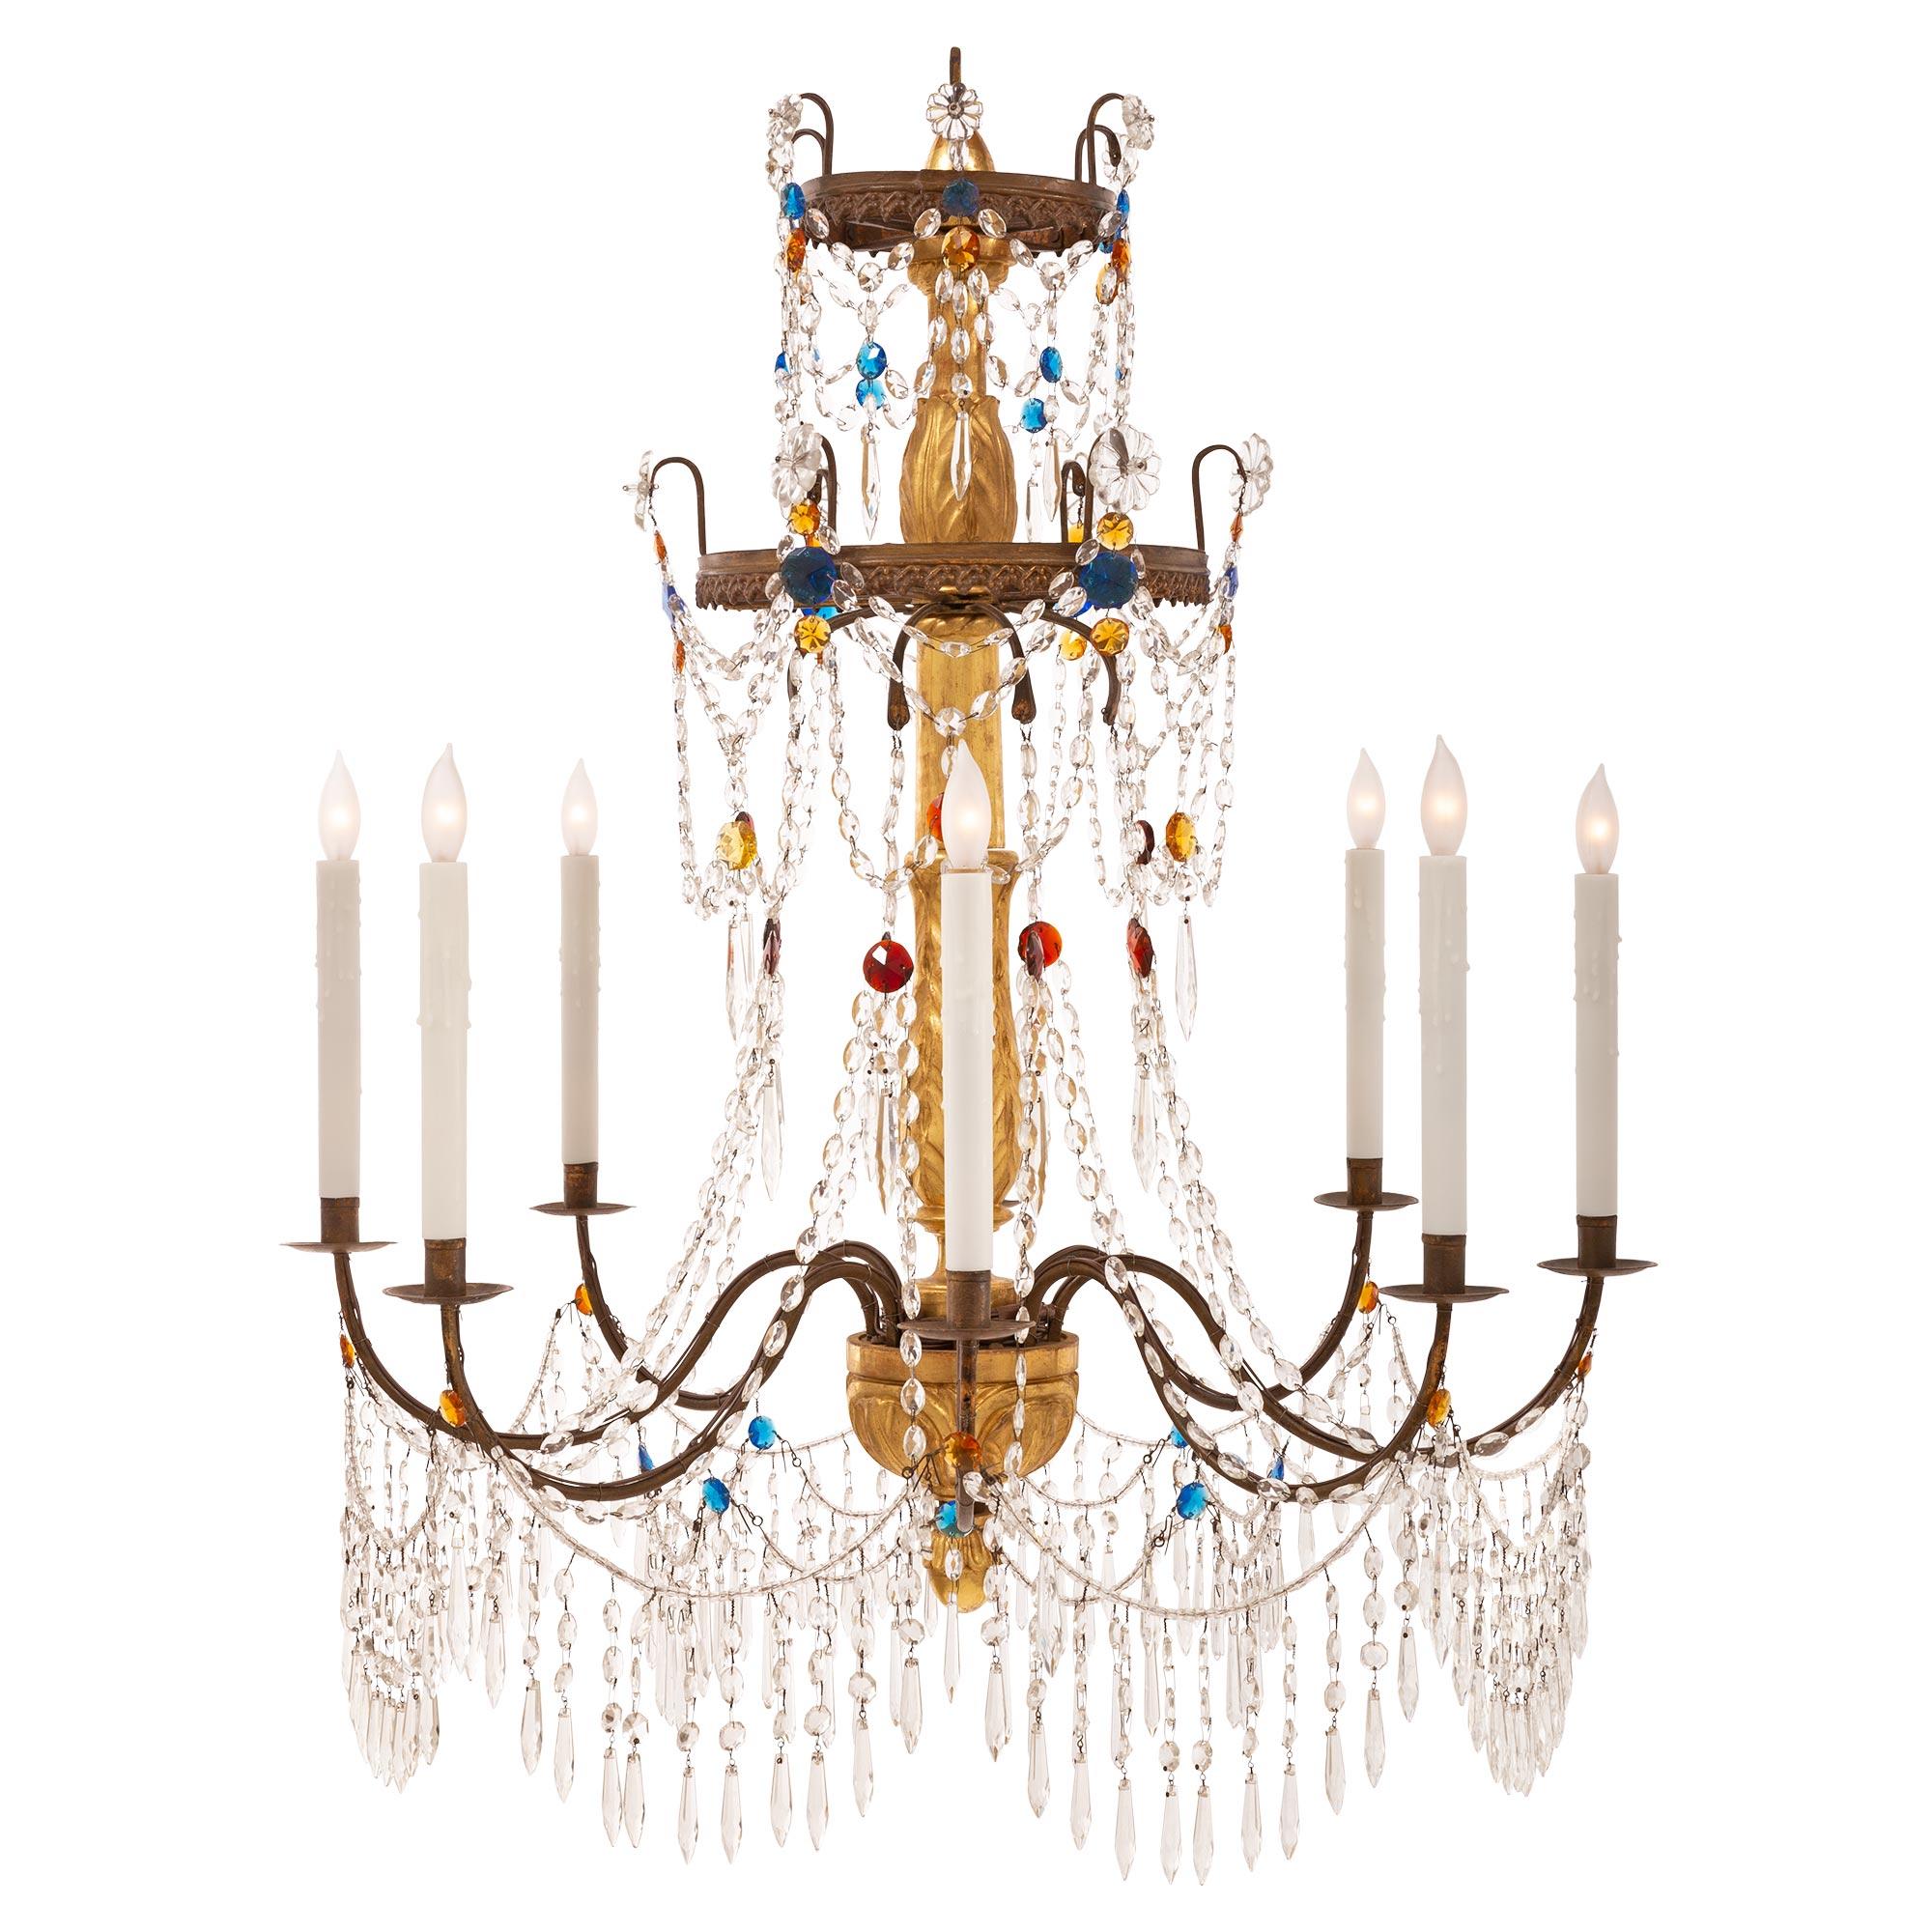 An exceptional pair of Italian 18th century Genovese st. giltwood, pressed metal, glass, and crystal chandeliers. Each eight arm chandelier is centered by a charming bottom foliate finial below most decorative carved acanthus leaf designs. Each